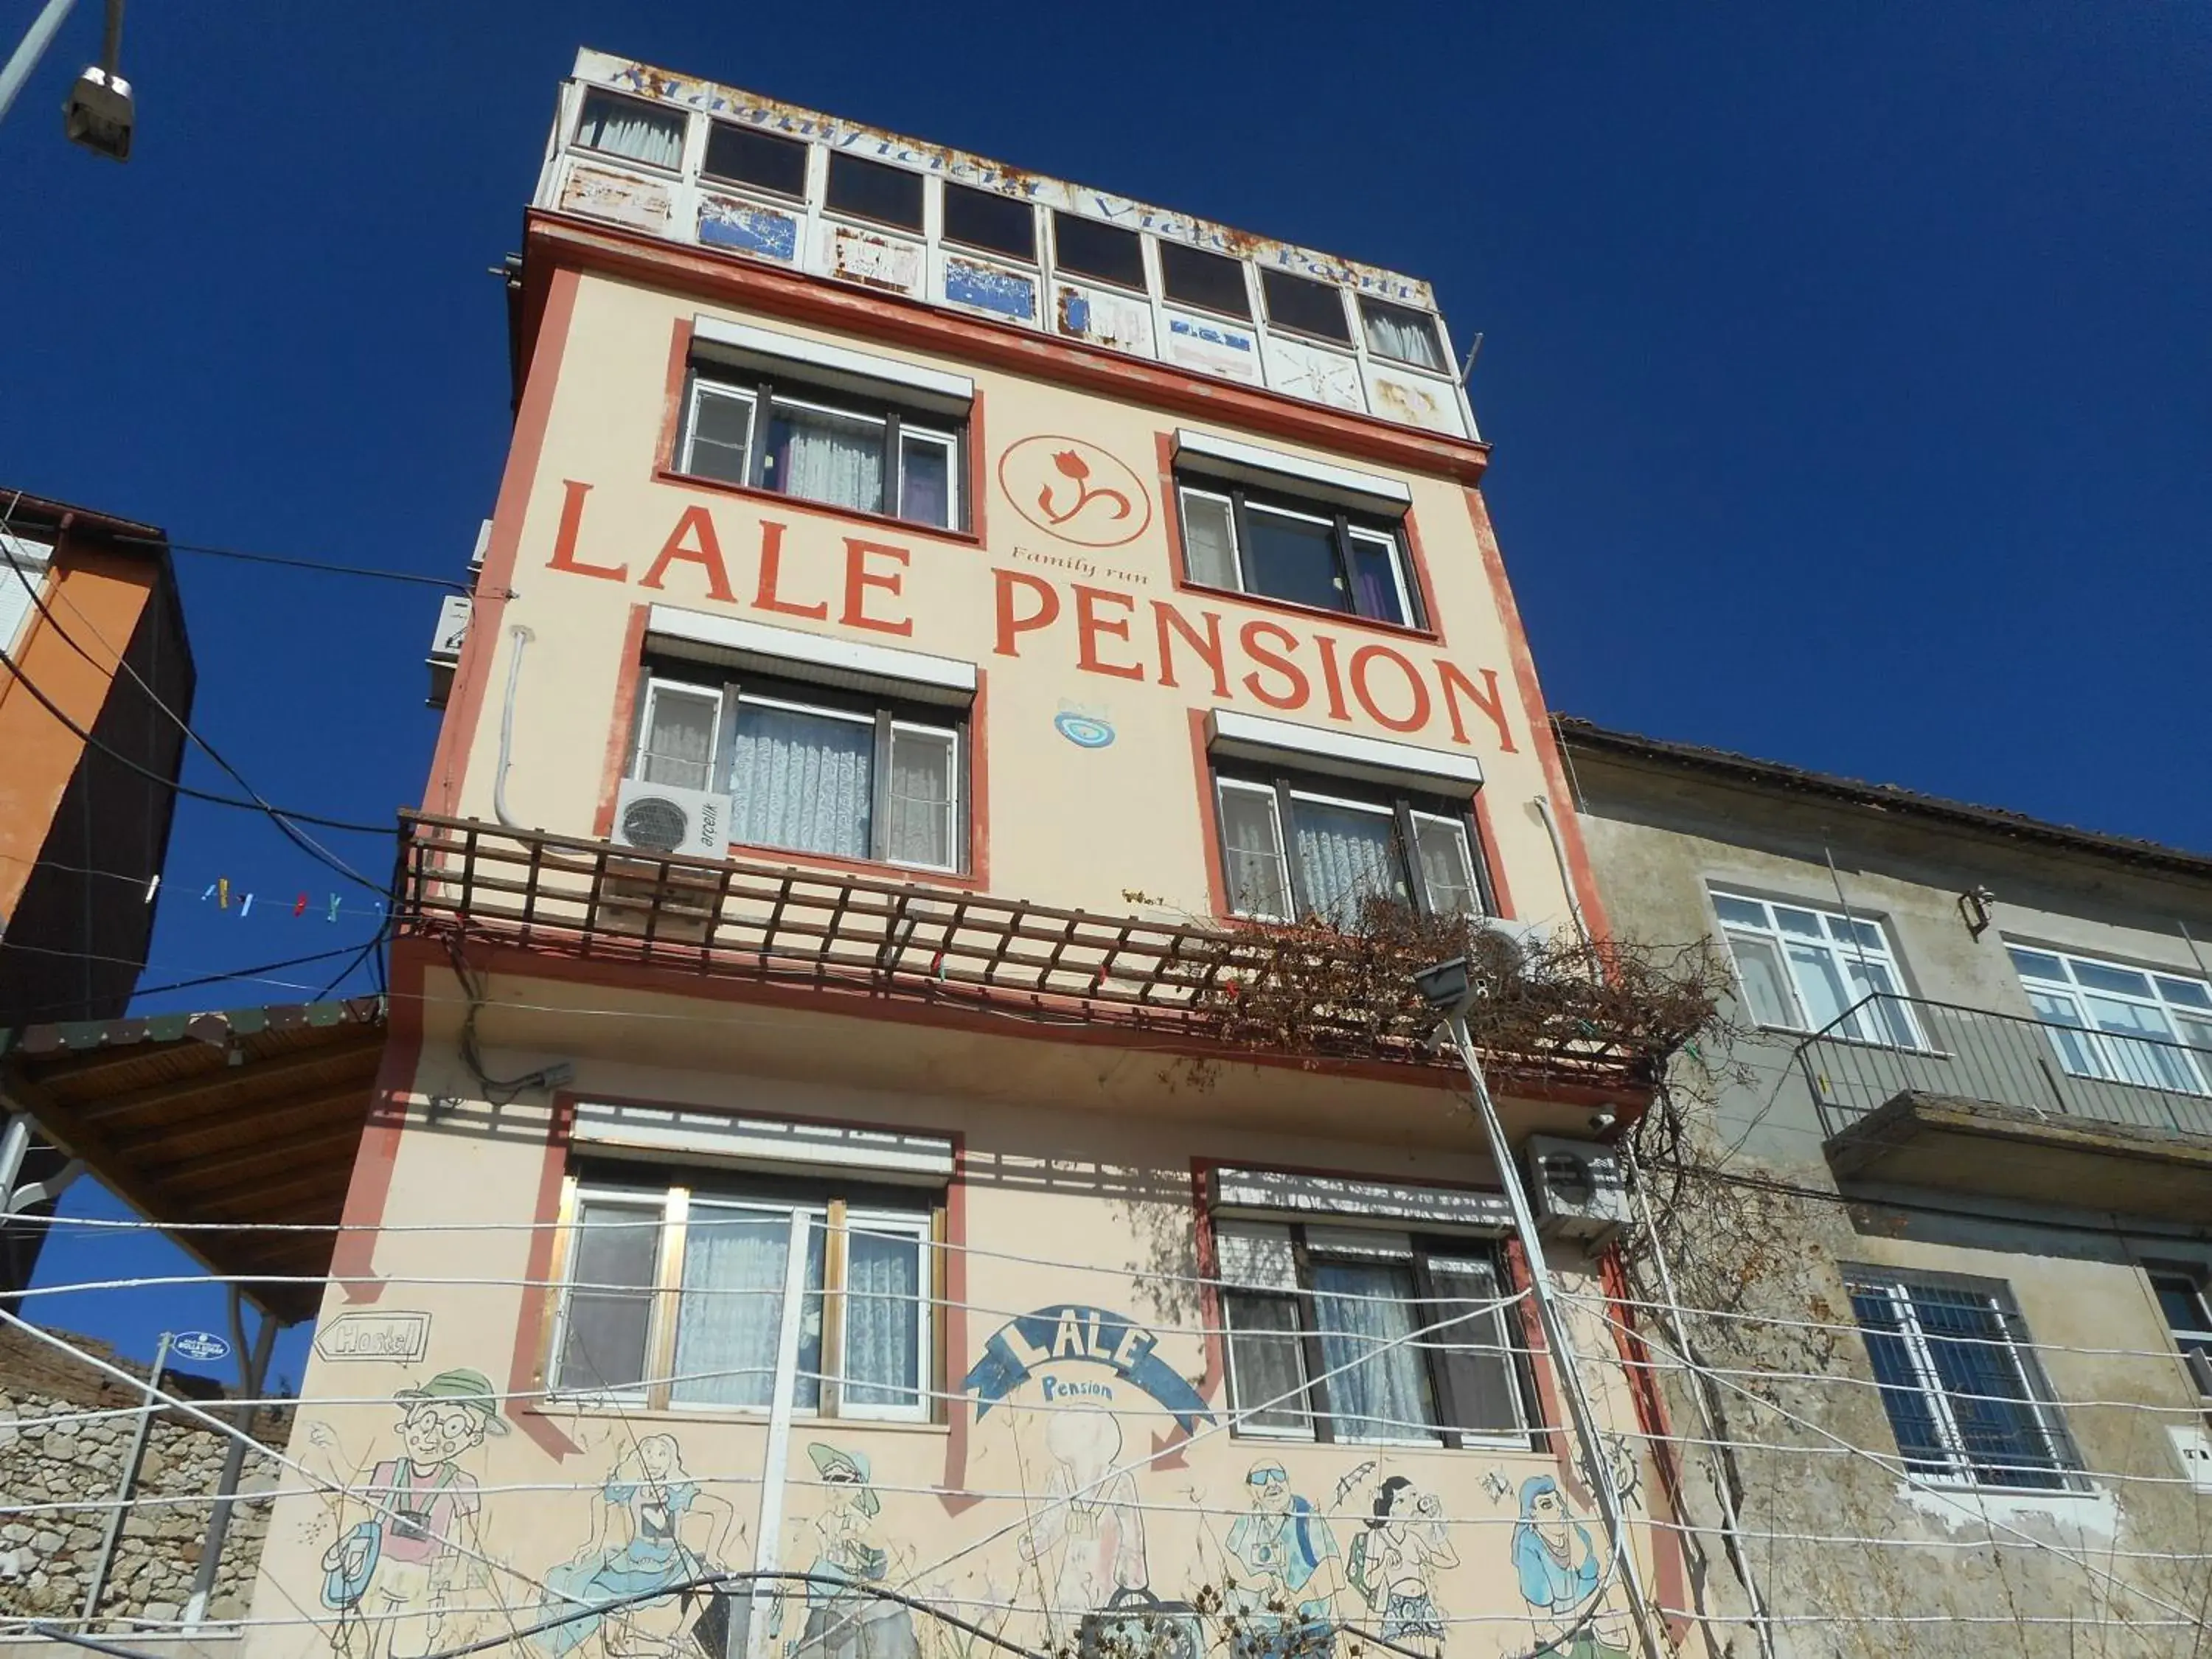 Property Building in Lale Pension                                                                                